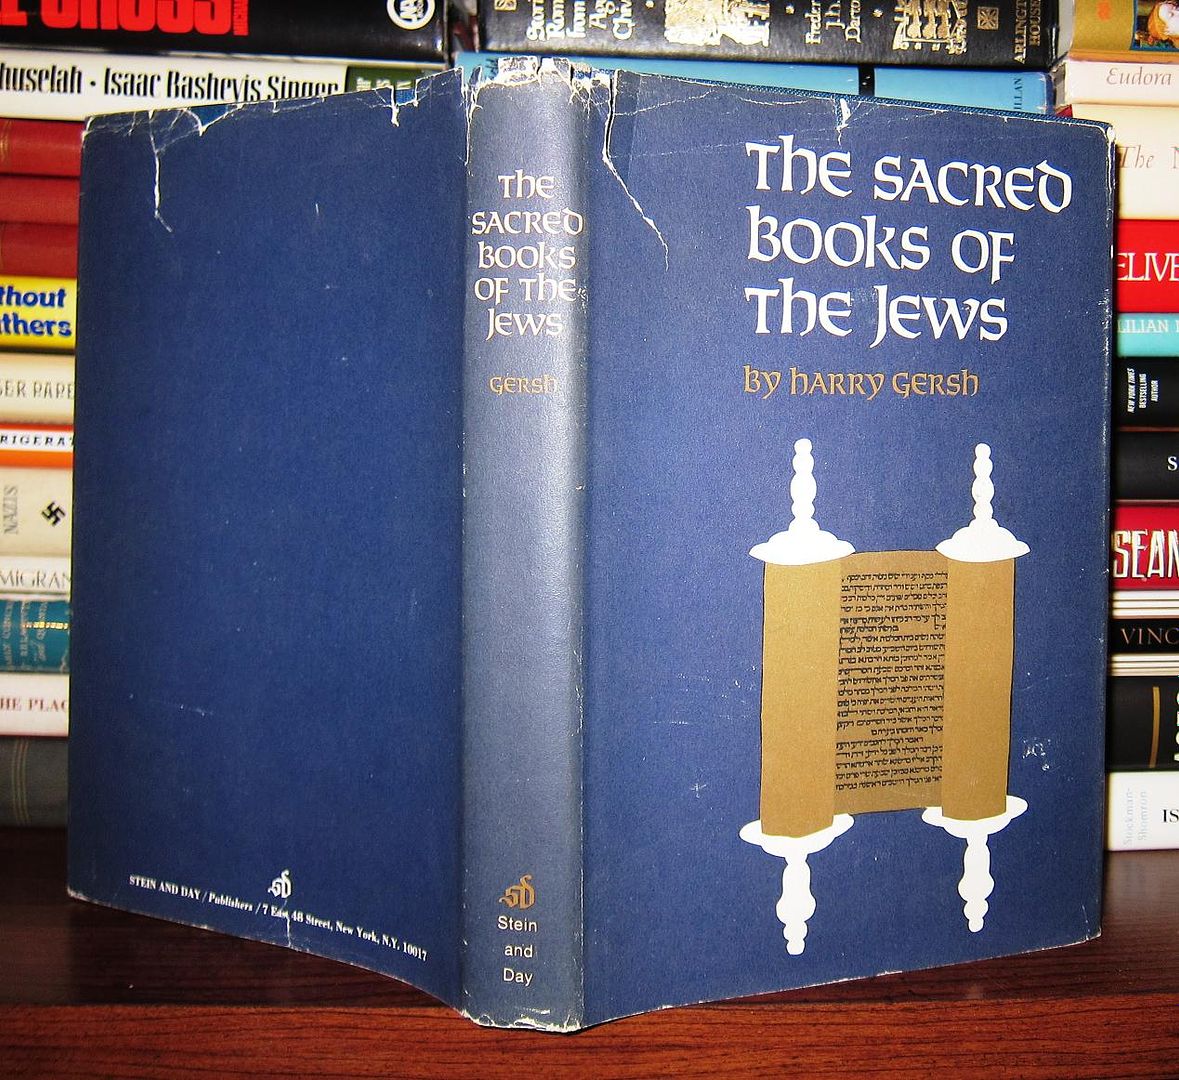 GERSH, HARRY - The Sacred Books of the Jews